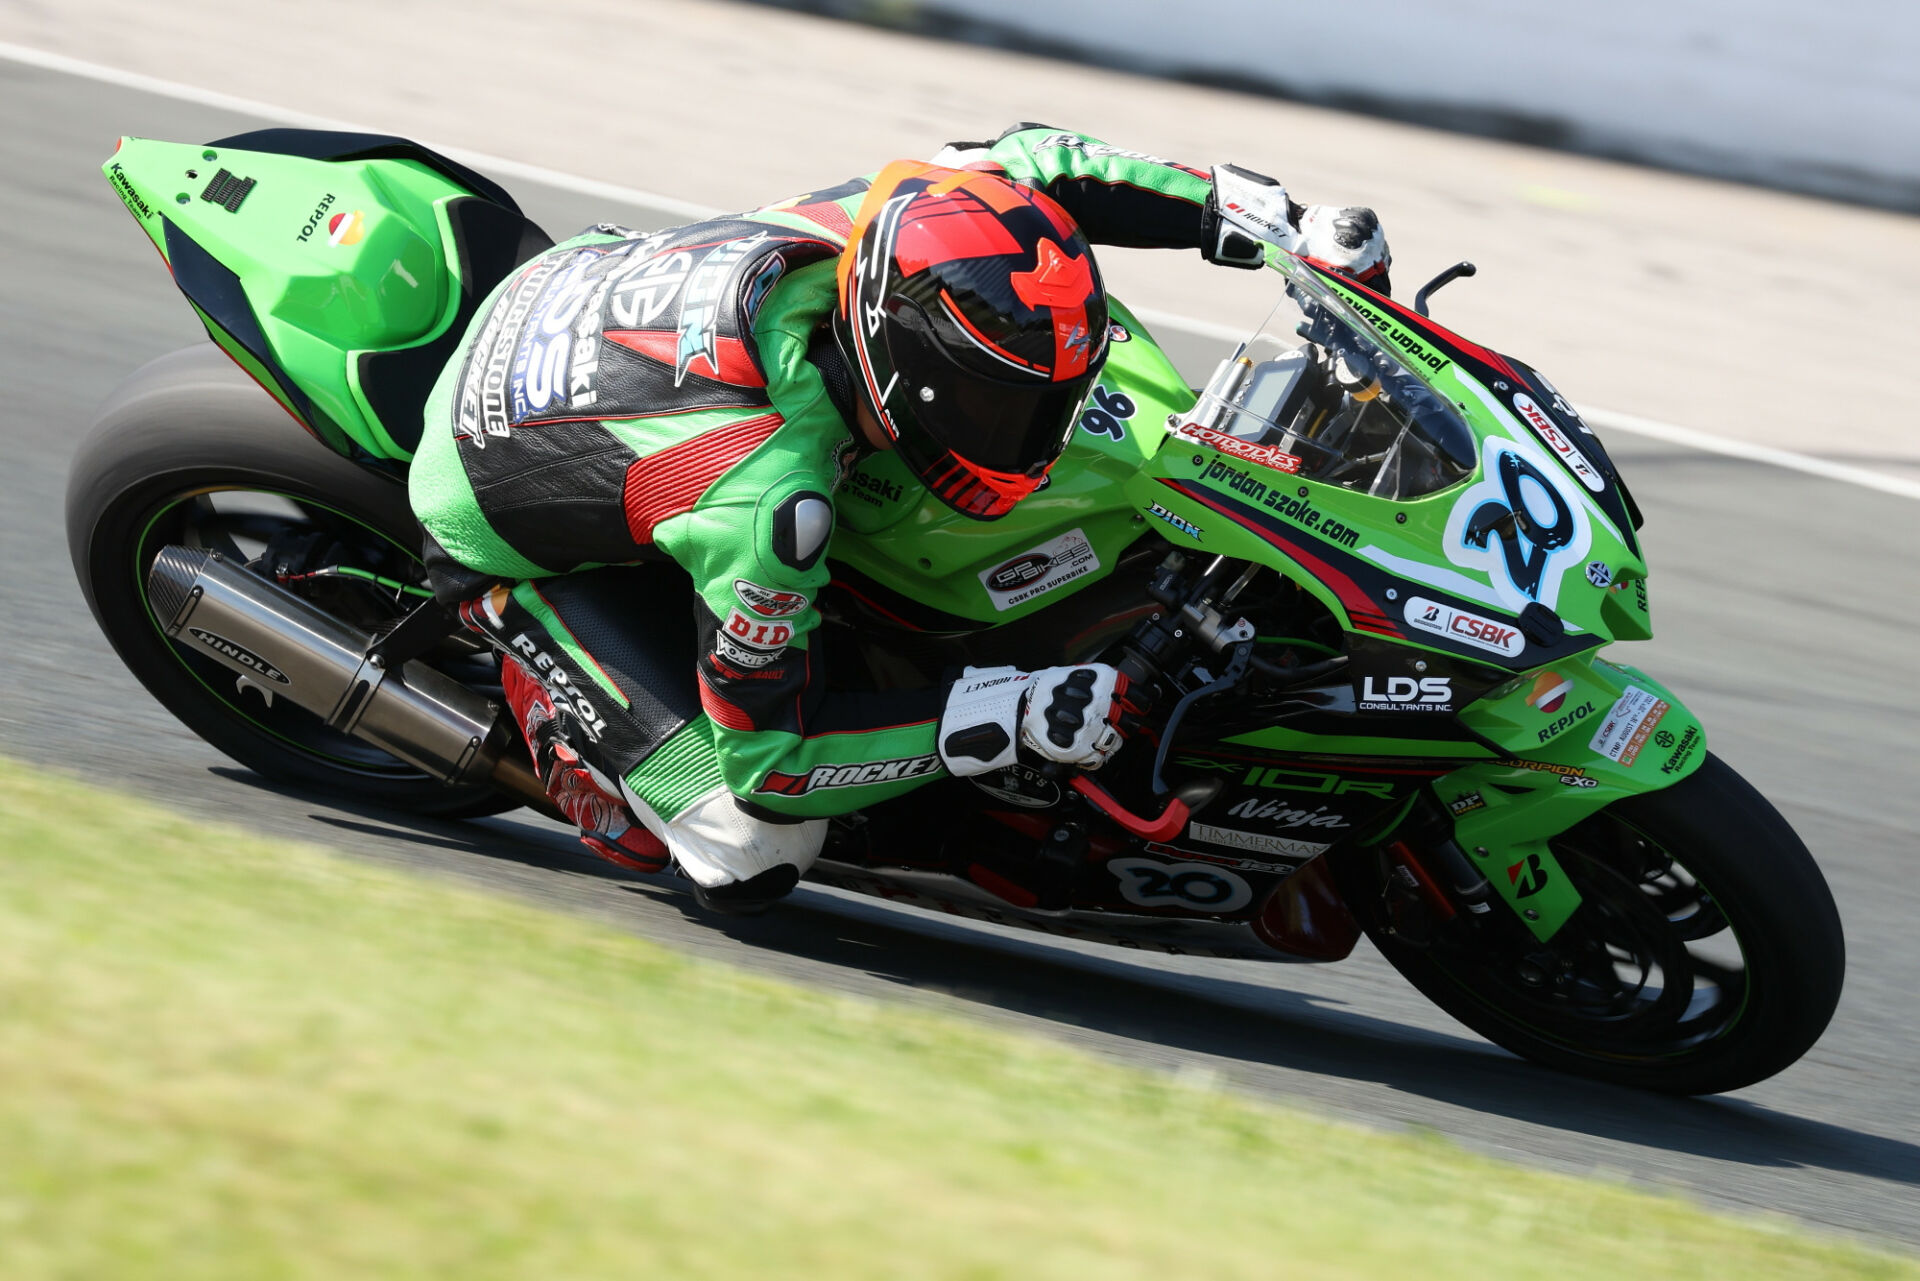 2022 Pro Sport Bike champ Trevor Dion (20) is making an appearance in the class for the first time this season. The Kawasaki rider will be pulling double-duty at the Shannonville finale, also competing in the Superbike class. Photo by Rob O'Brien, courtesy CSBK.